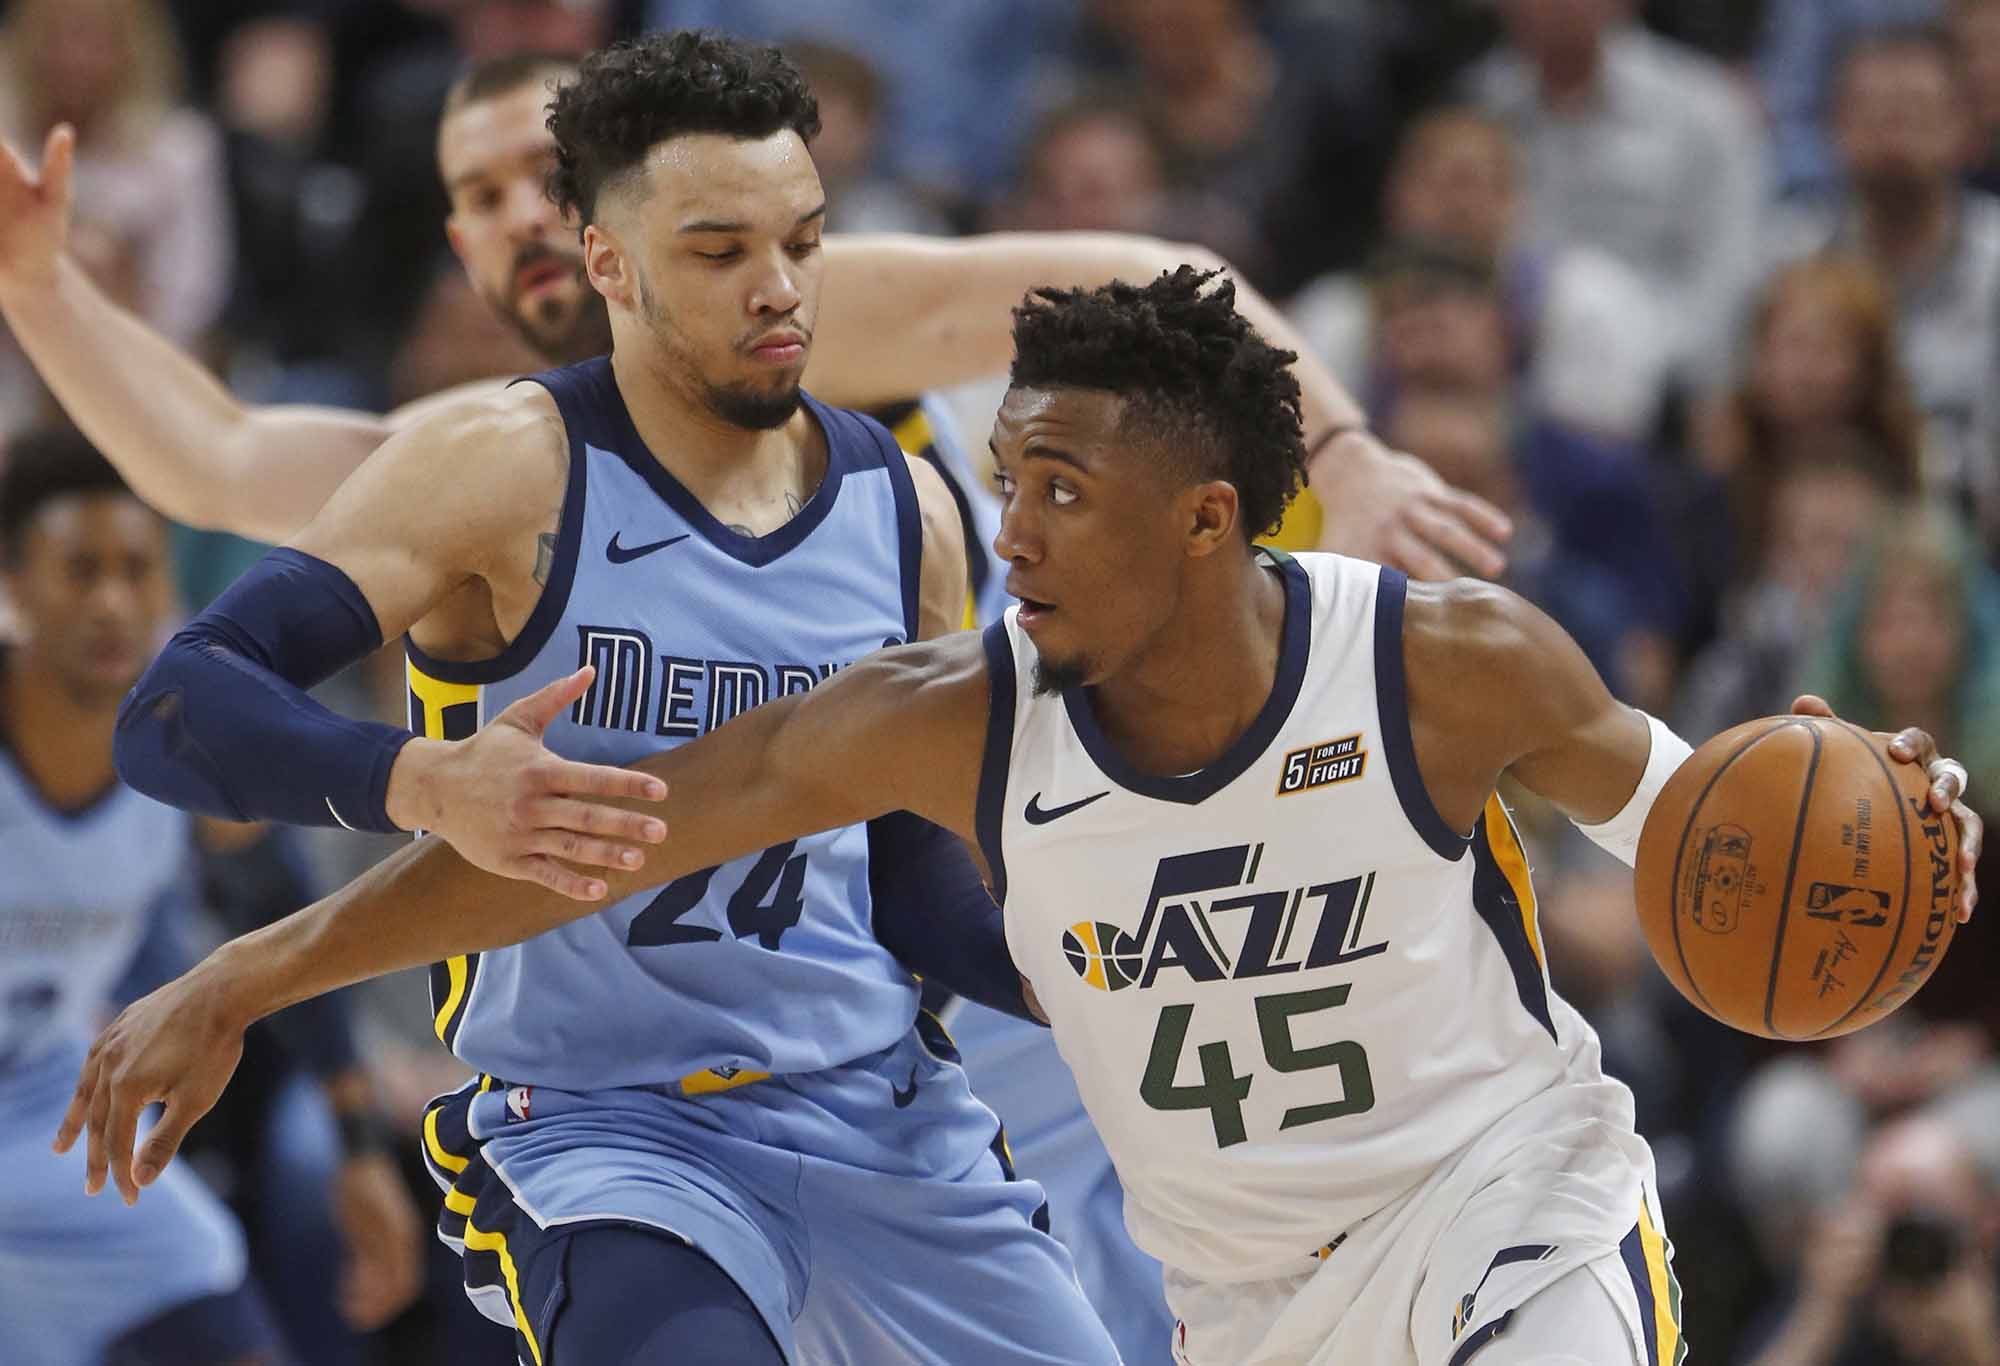 Donovan Mitchell for the Jazz